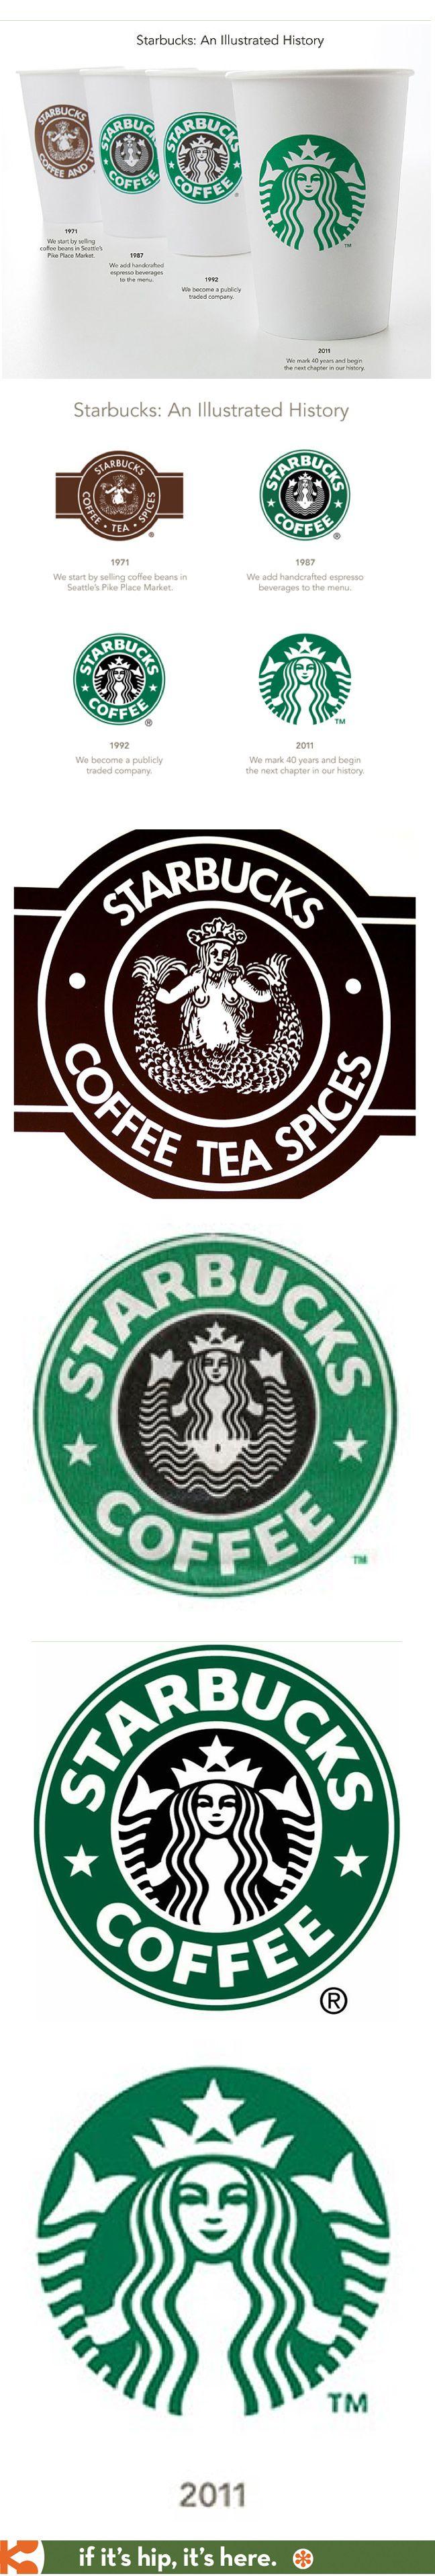 Small History Logo - Evolution of the Starbucks Logo Small changes to update a logo as